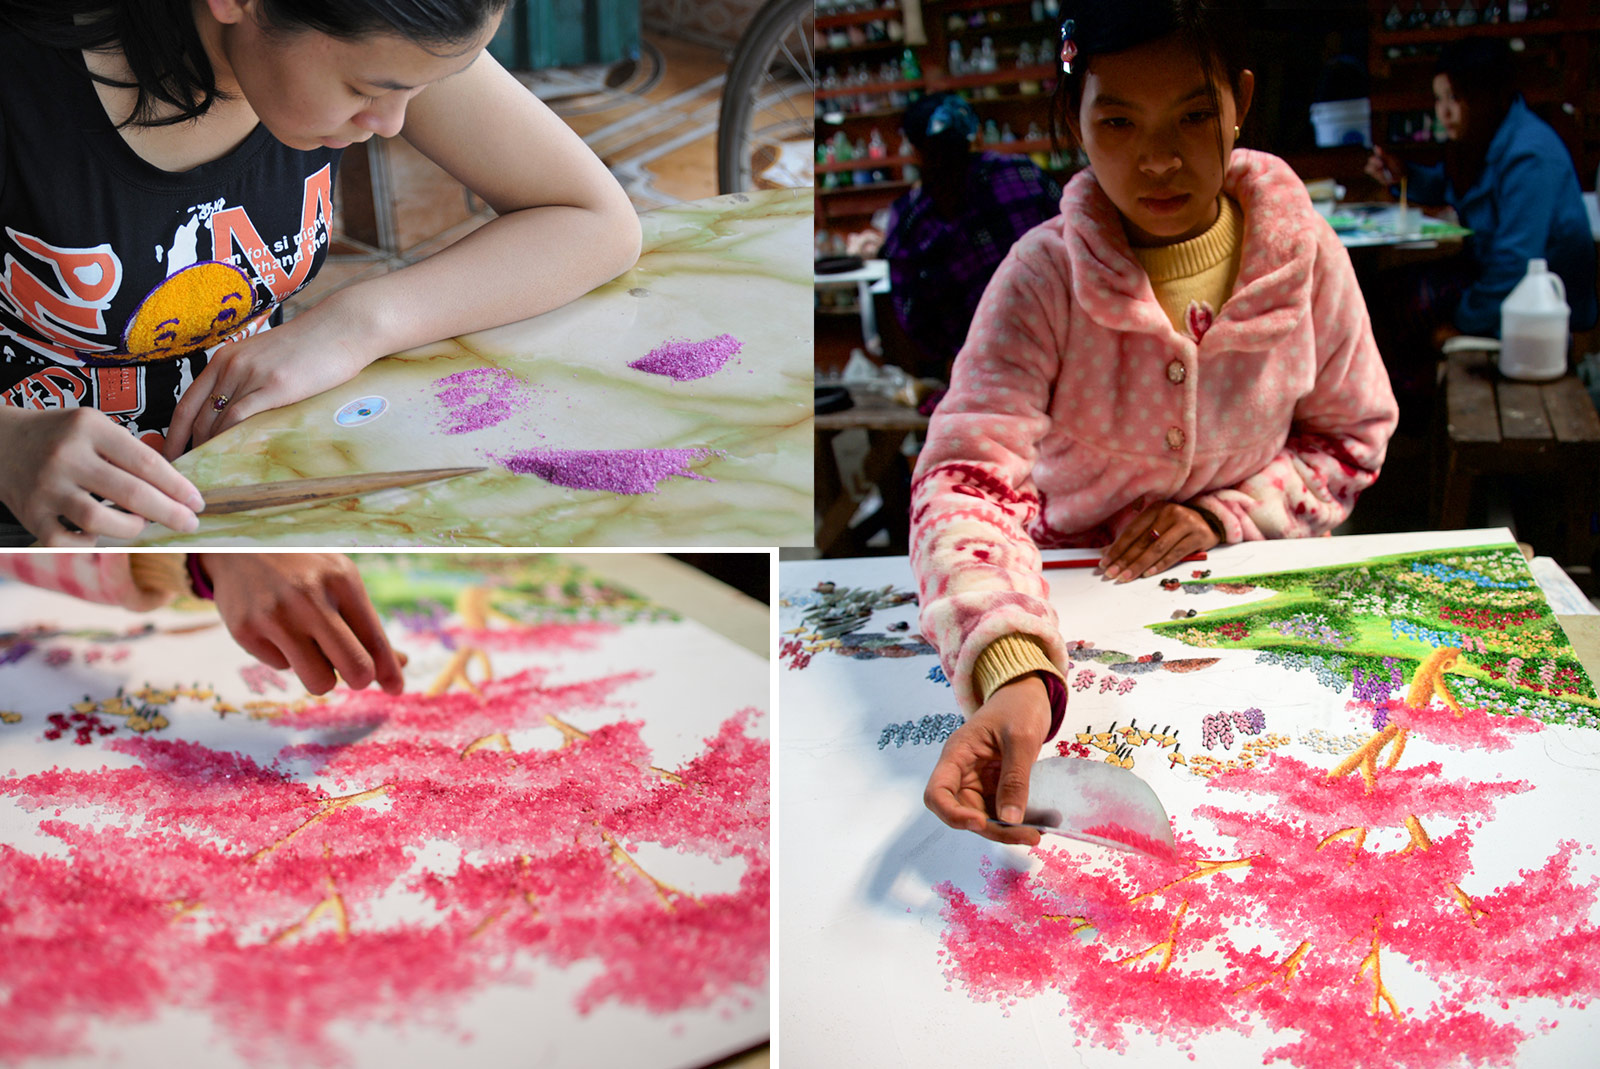 Using pink gemstones, a gem painter creates a beautiful pink tree by depositing crushed gemstones on a canvas